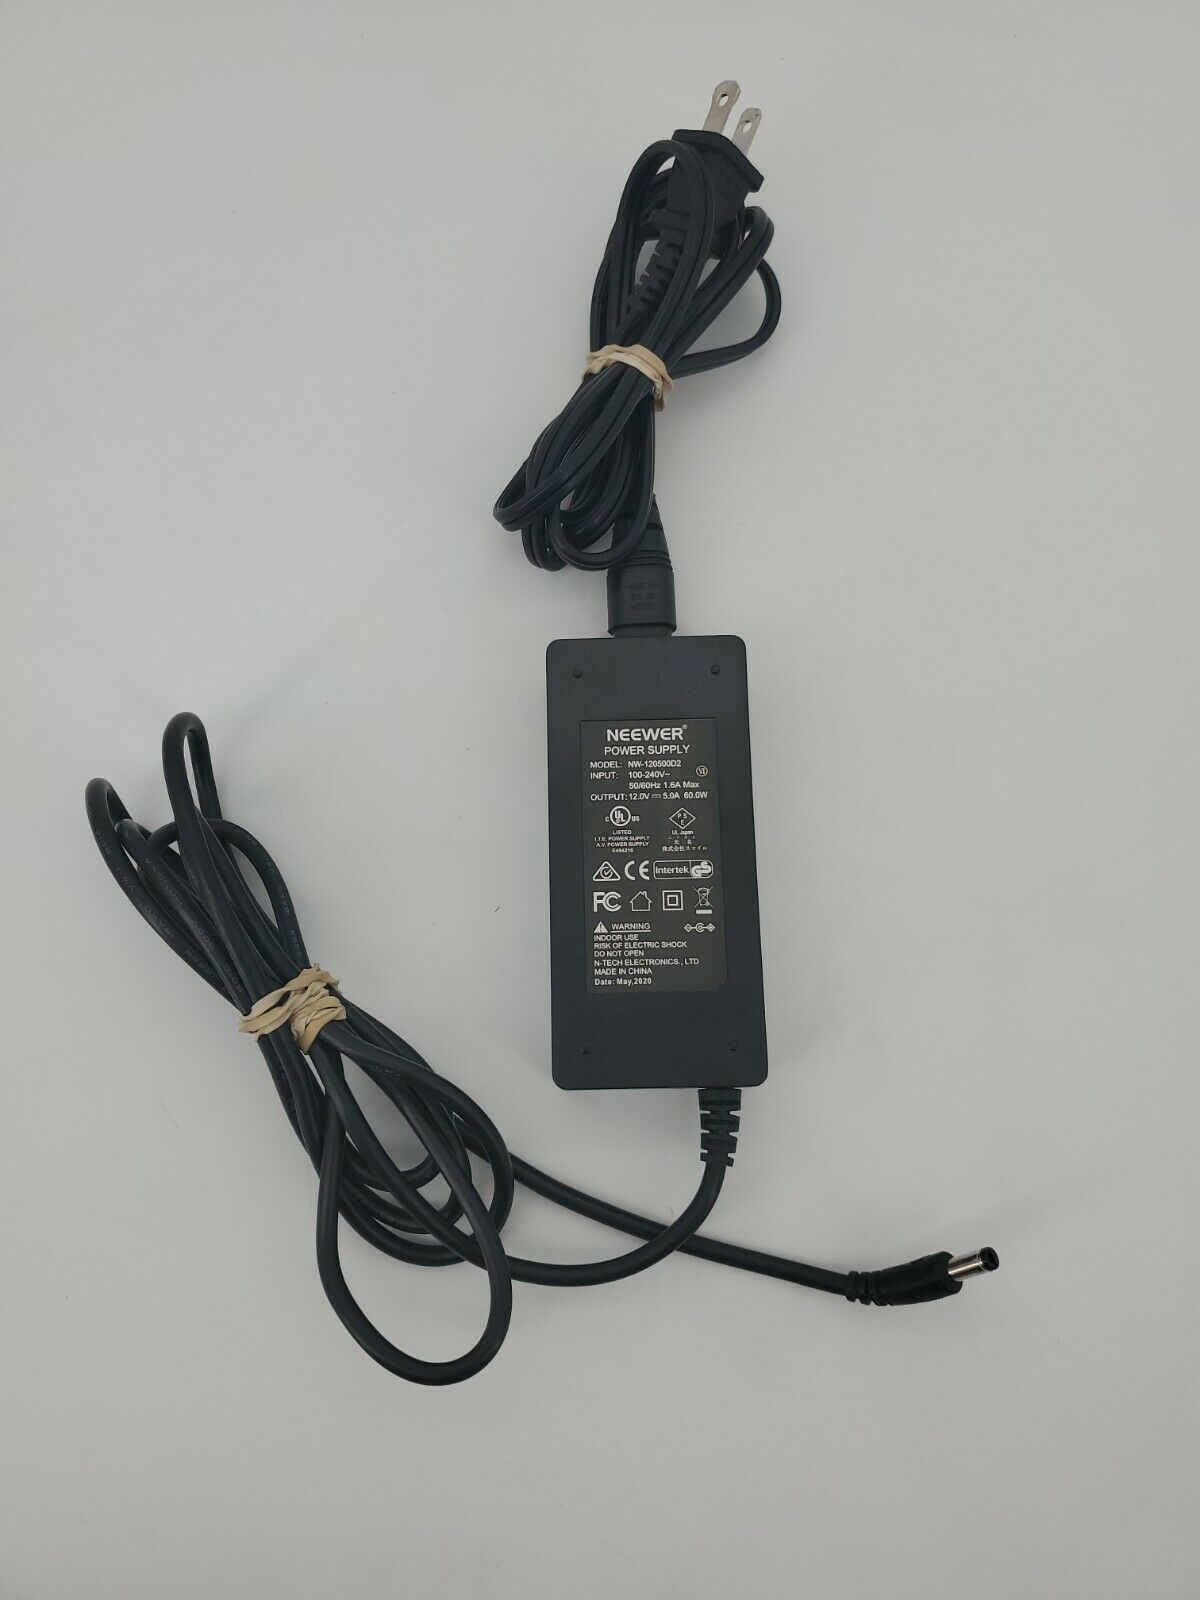 Neewer Power Adapter Model NW-1205500D2 Indoor Use Type: Adapter Features: new Brand: Neewer ewer Power Adapter Mo - Click Image to Close